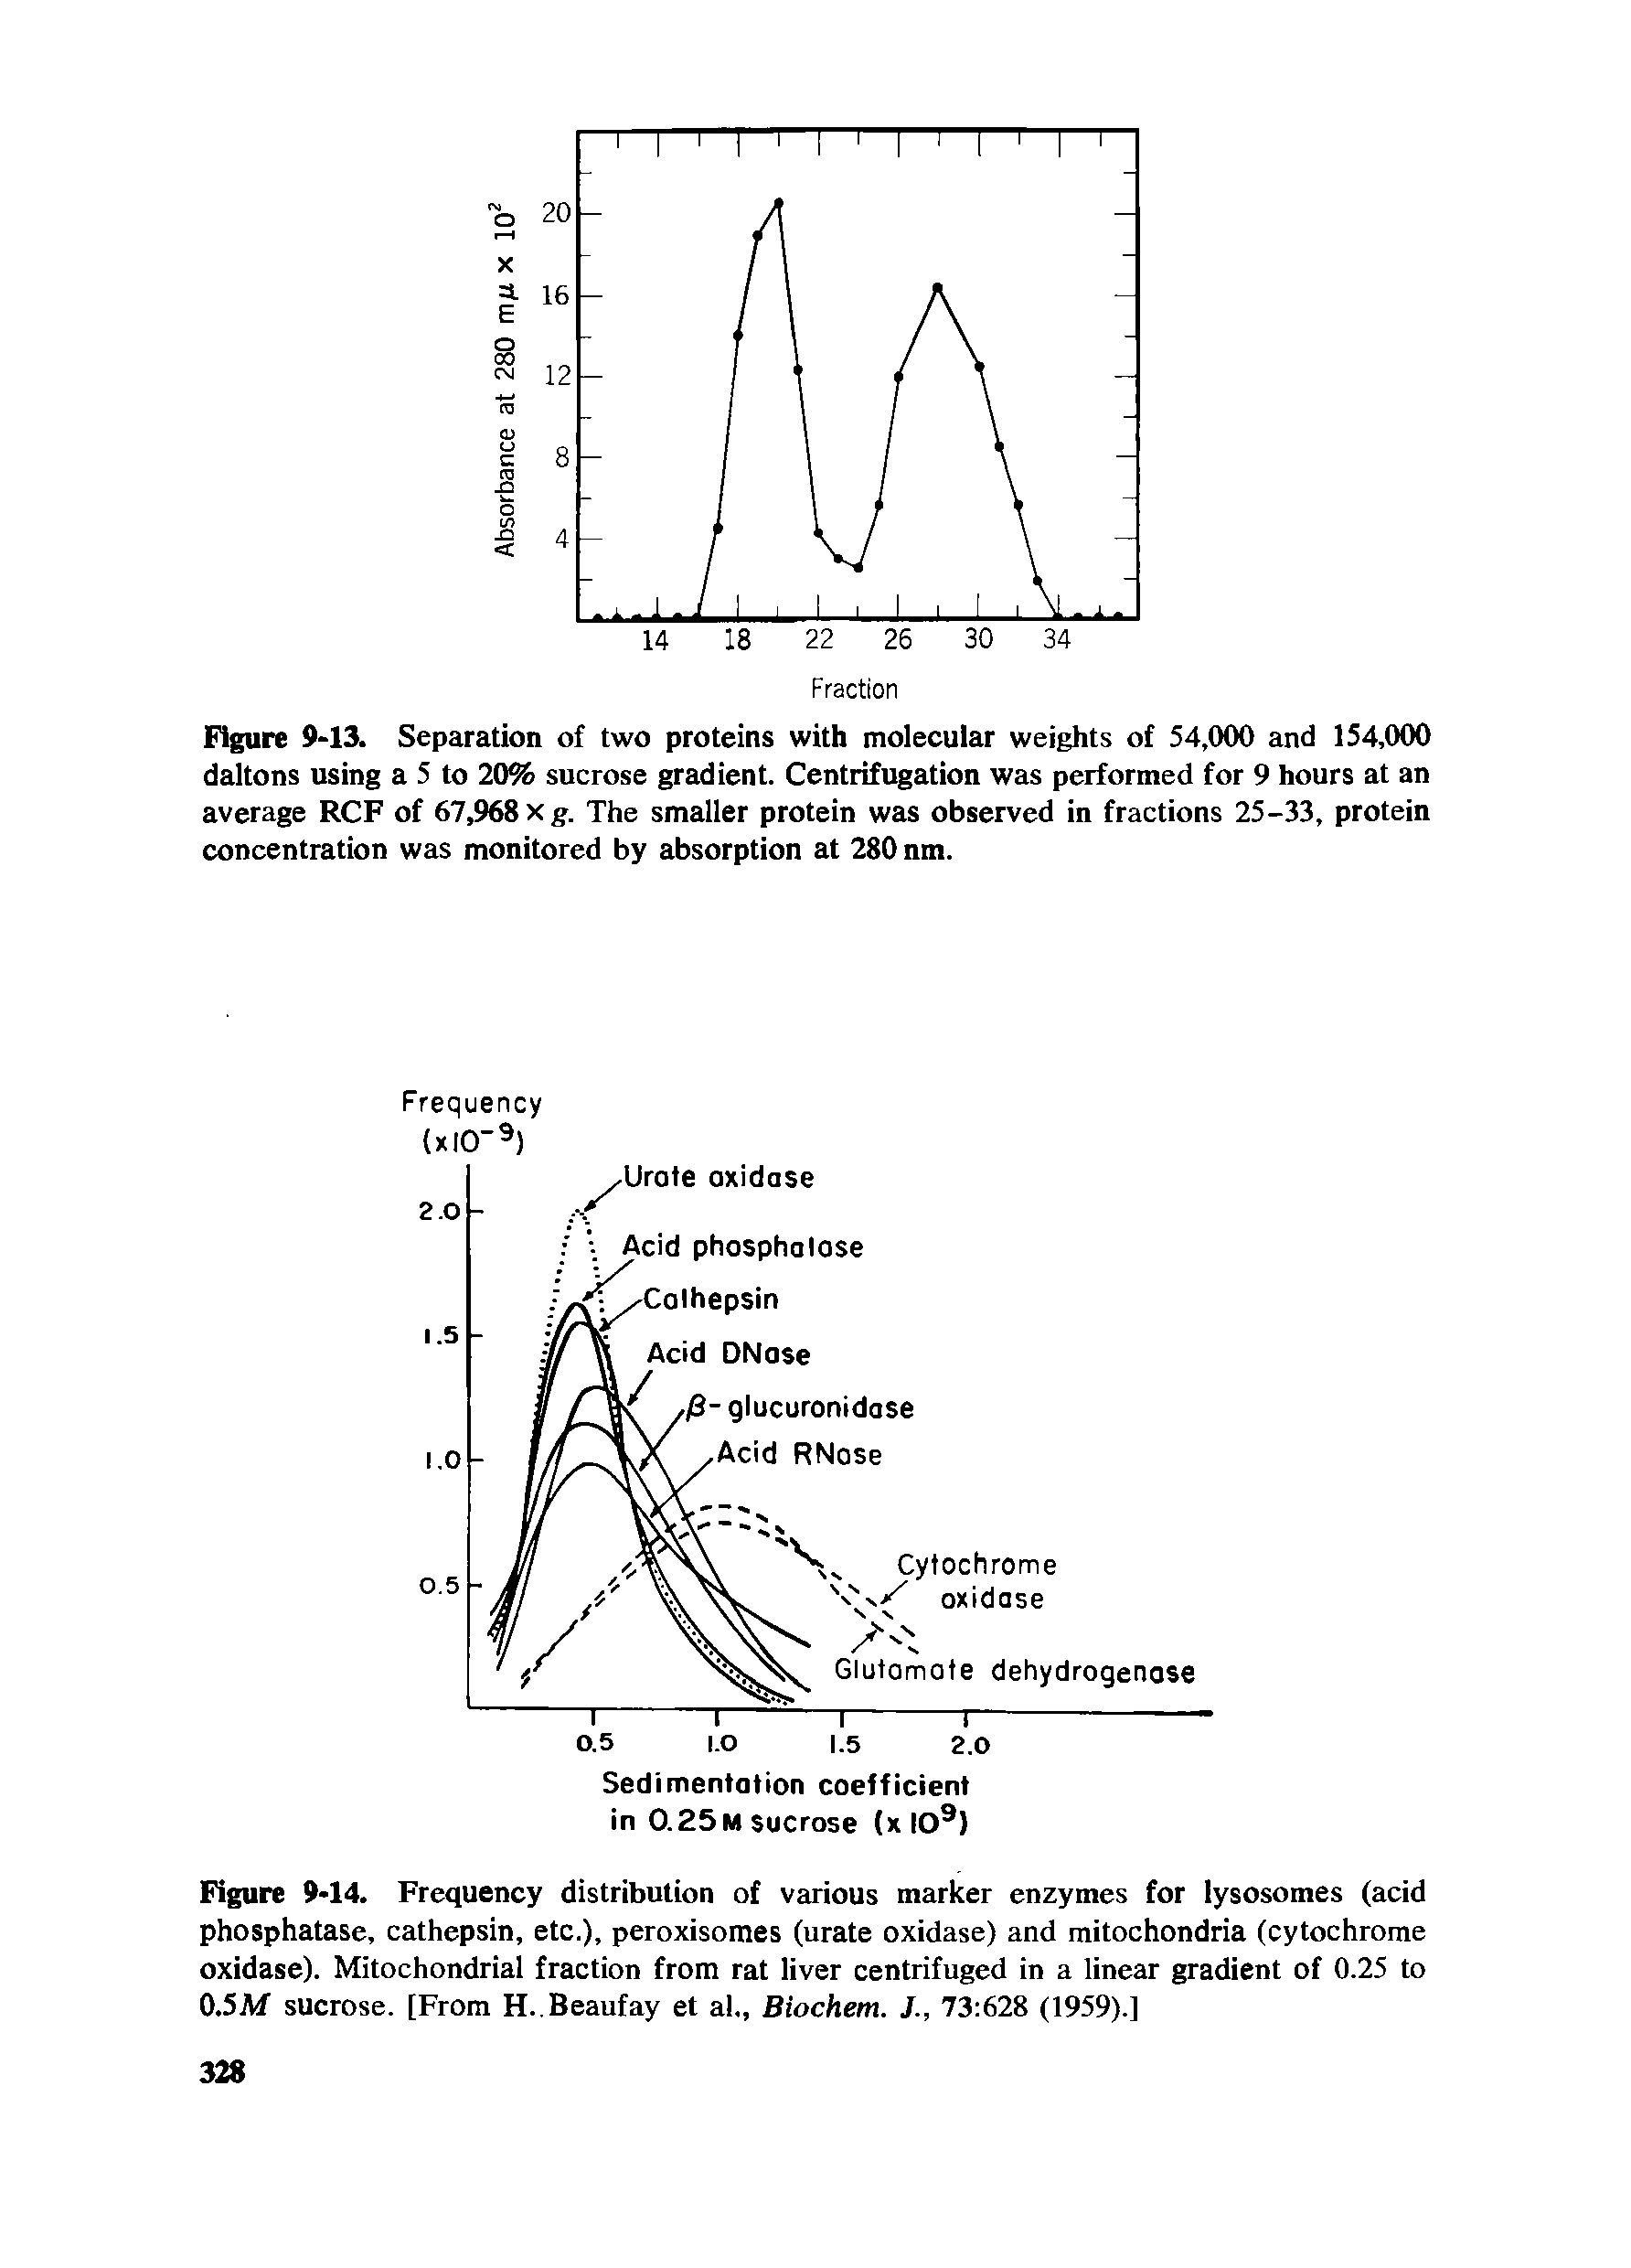 Figure 9-14. Frequency distribution of various marker enzymes for lysosomes (acid phosphatase, cathepsin, etc.), peroxisomes (urate oxidase) and mitochondria (cytochrome oxidase). Mitochondrial fraction from rat liver centrifuged in a linear gradient of 0.25 to 0.5M sucrose. [From H. Beaufay et al., Biochem. /., 73 628 (1959).]...